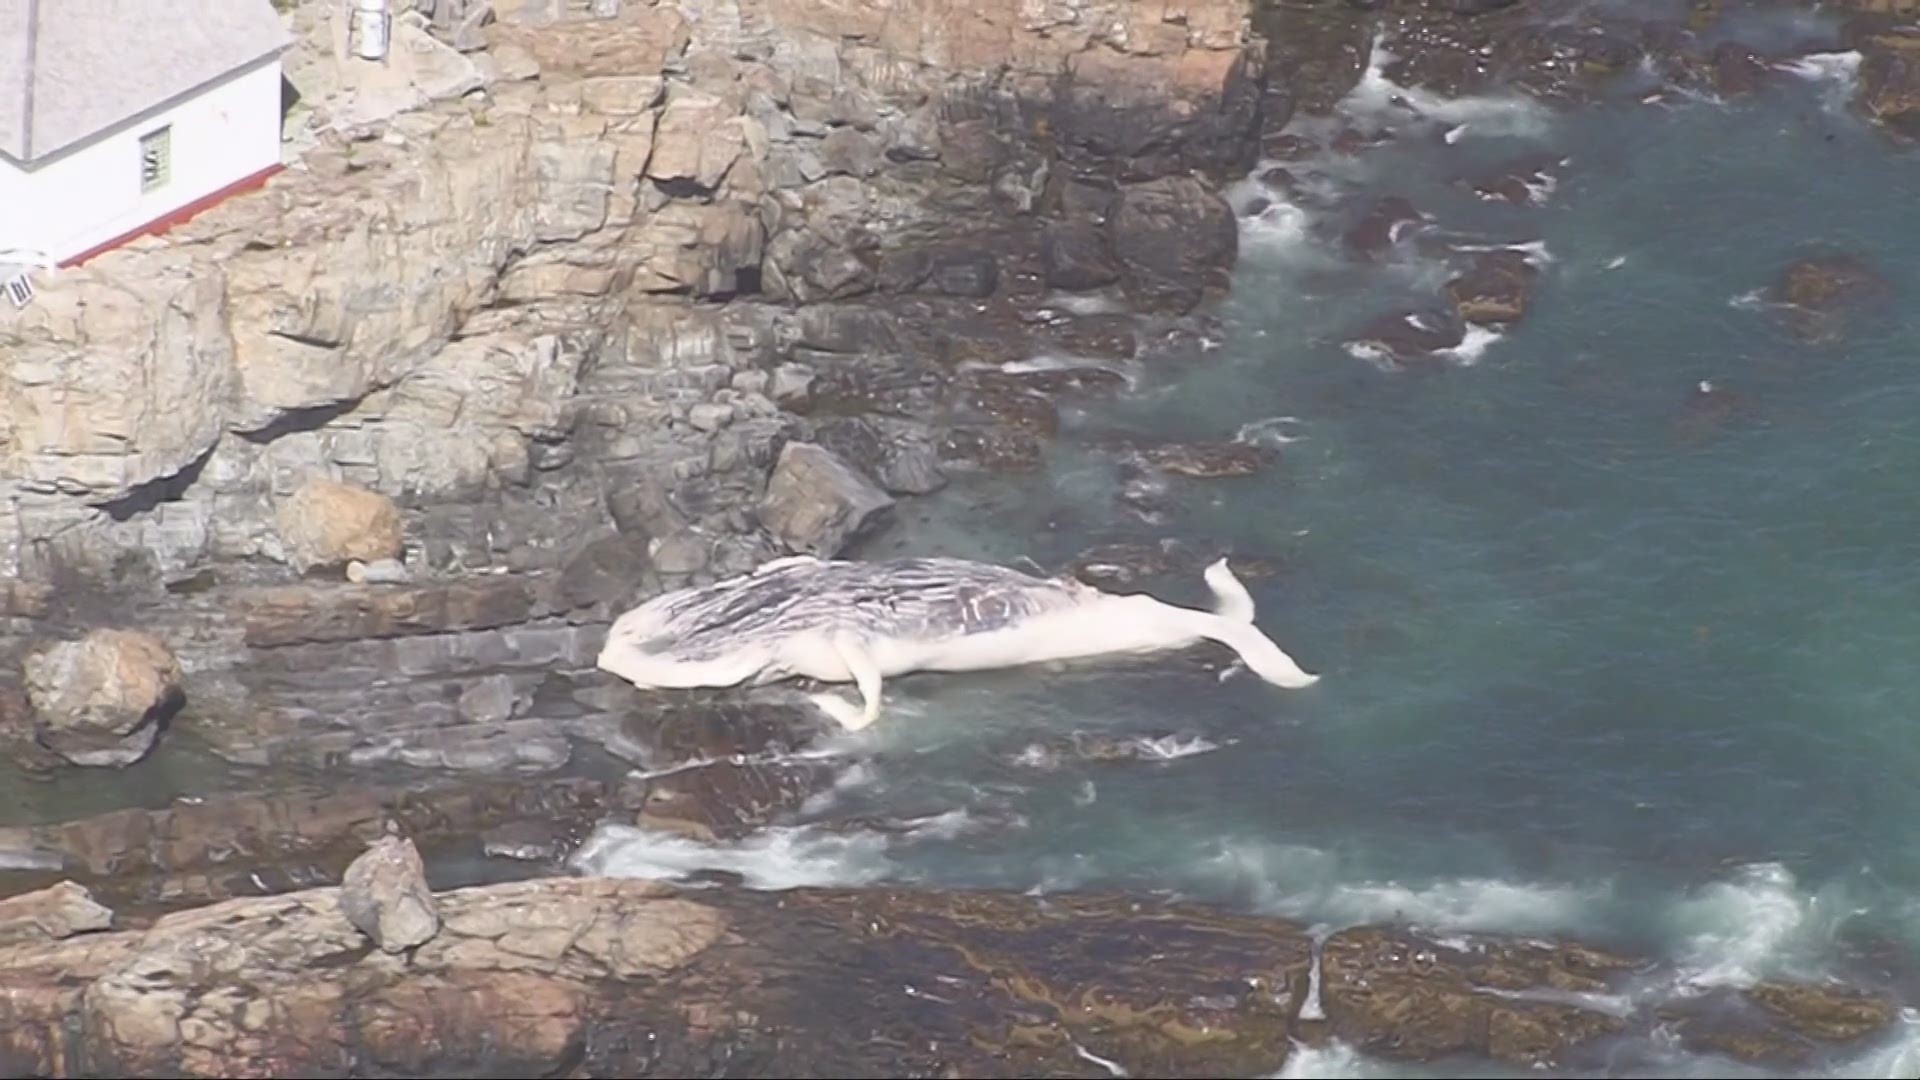 Officials are investigating after two dead whales washed up on Boston-area beaches Friday.